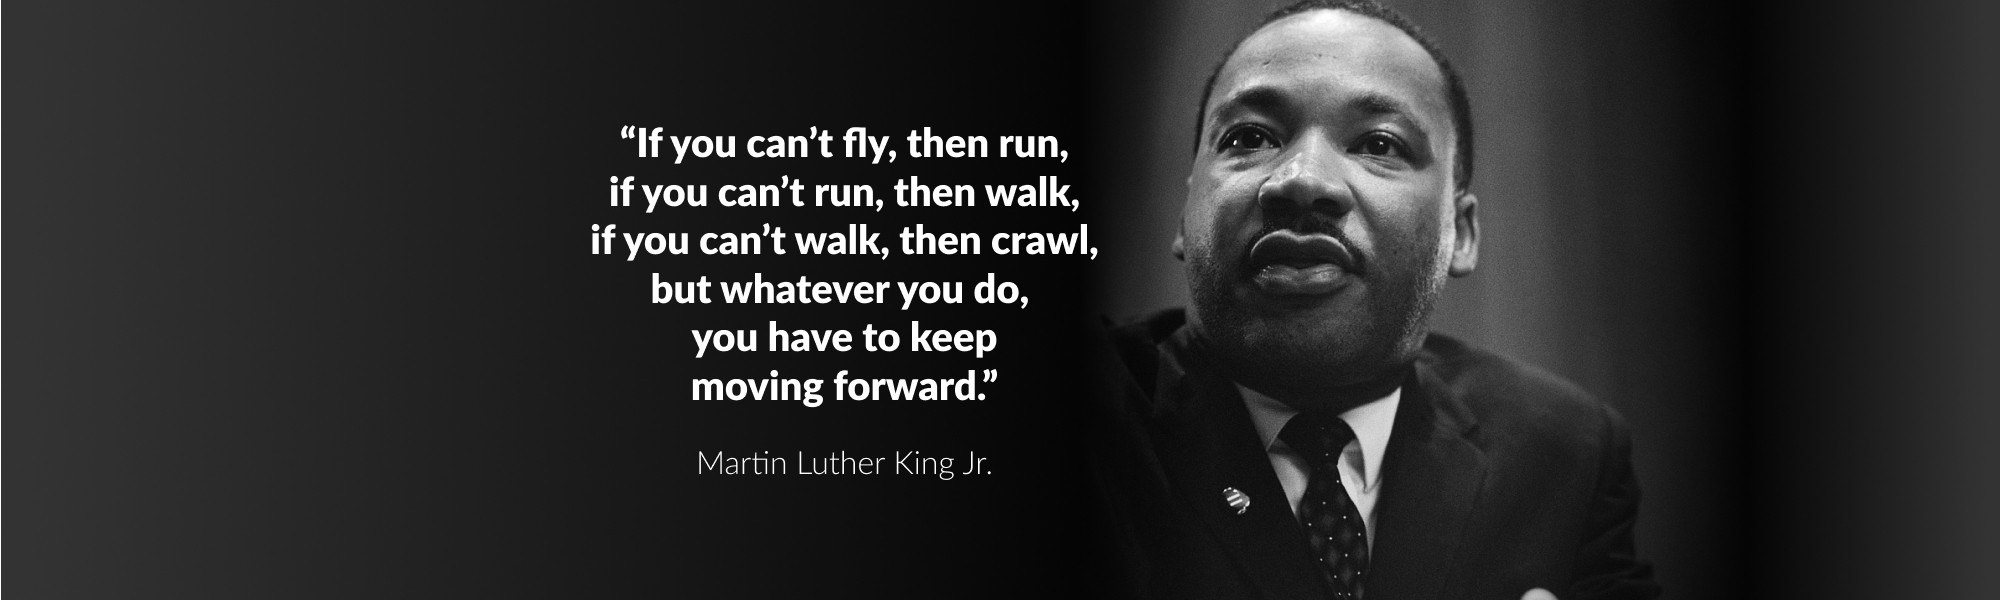 Martin Luther King Jr.Leadership Quotes
 10 Inspirational Leadership Quotes by Martin Luther King Jr